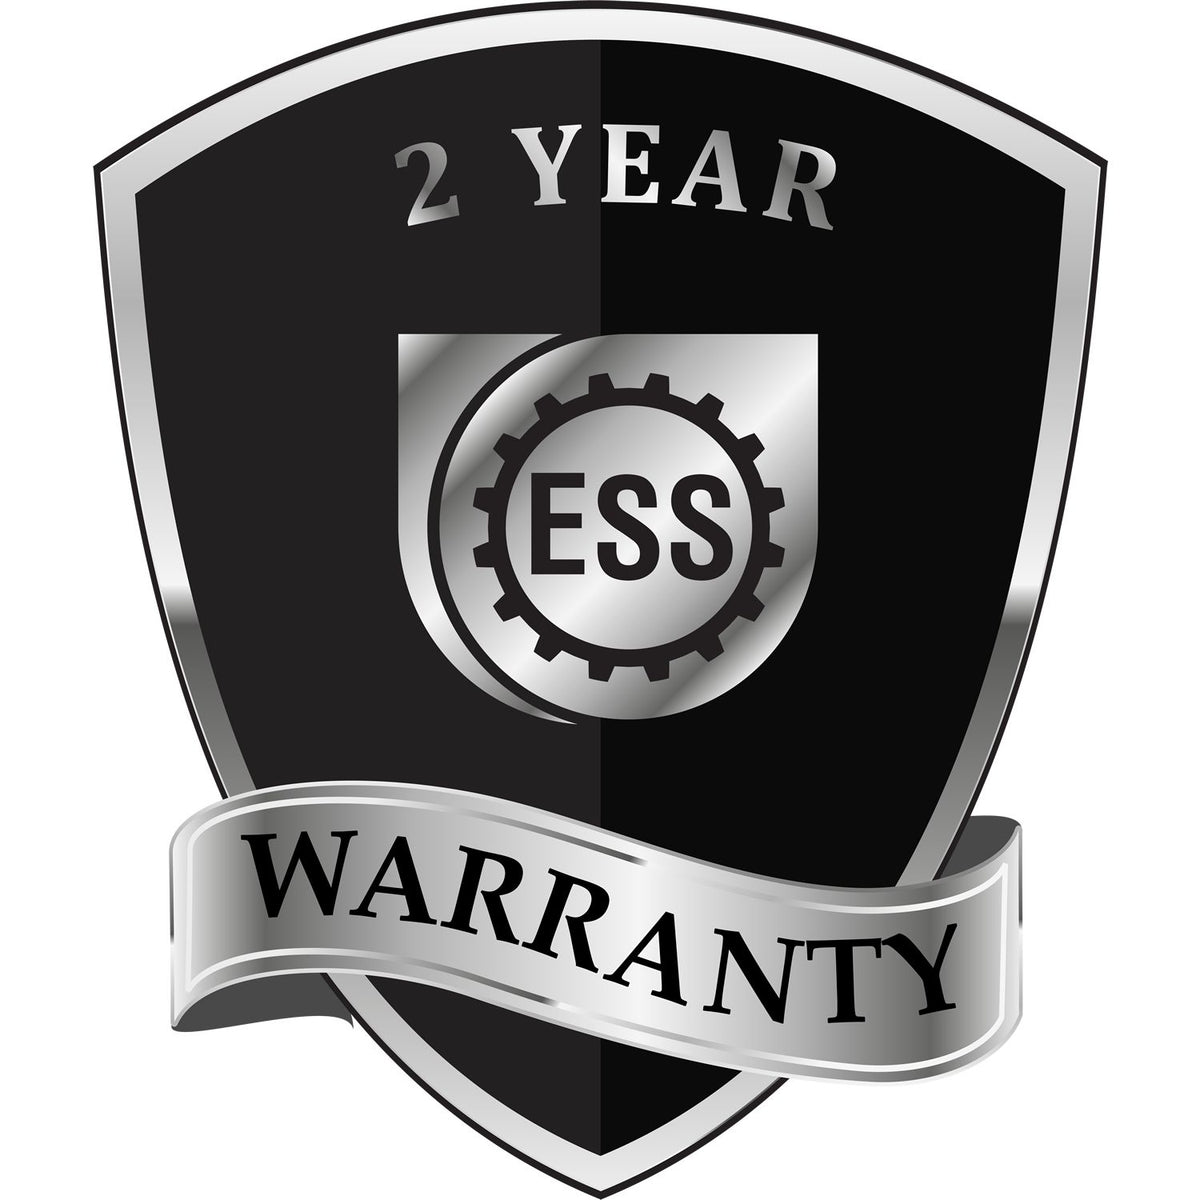 A badge or emblem showing a warranty icon for the Heavy Duty Cast Iron Oklahoma Engineer Seal Embosser